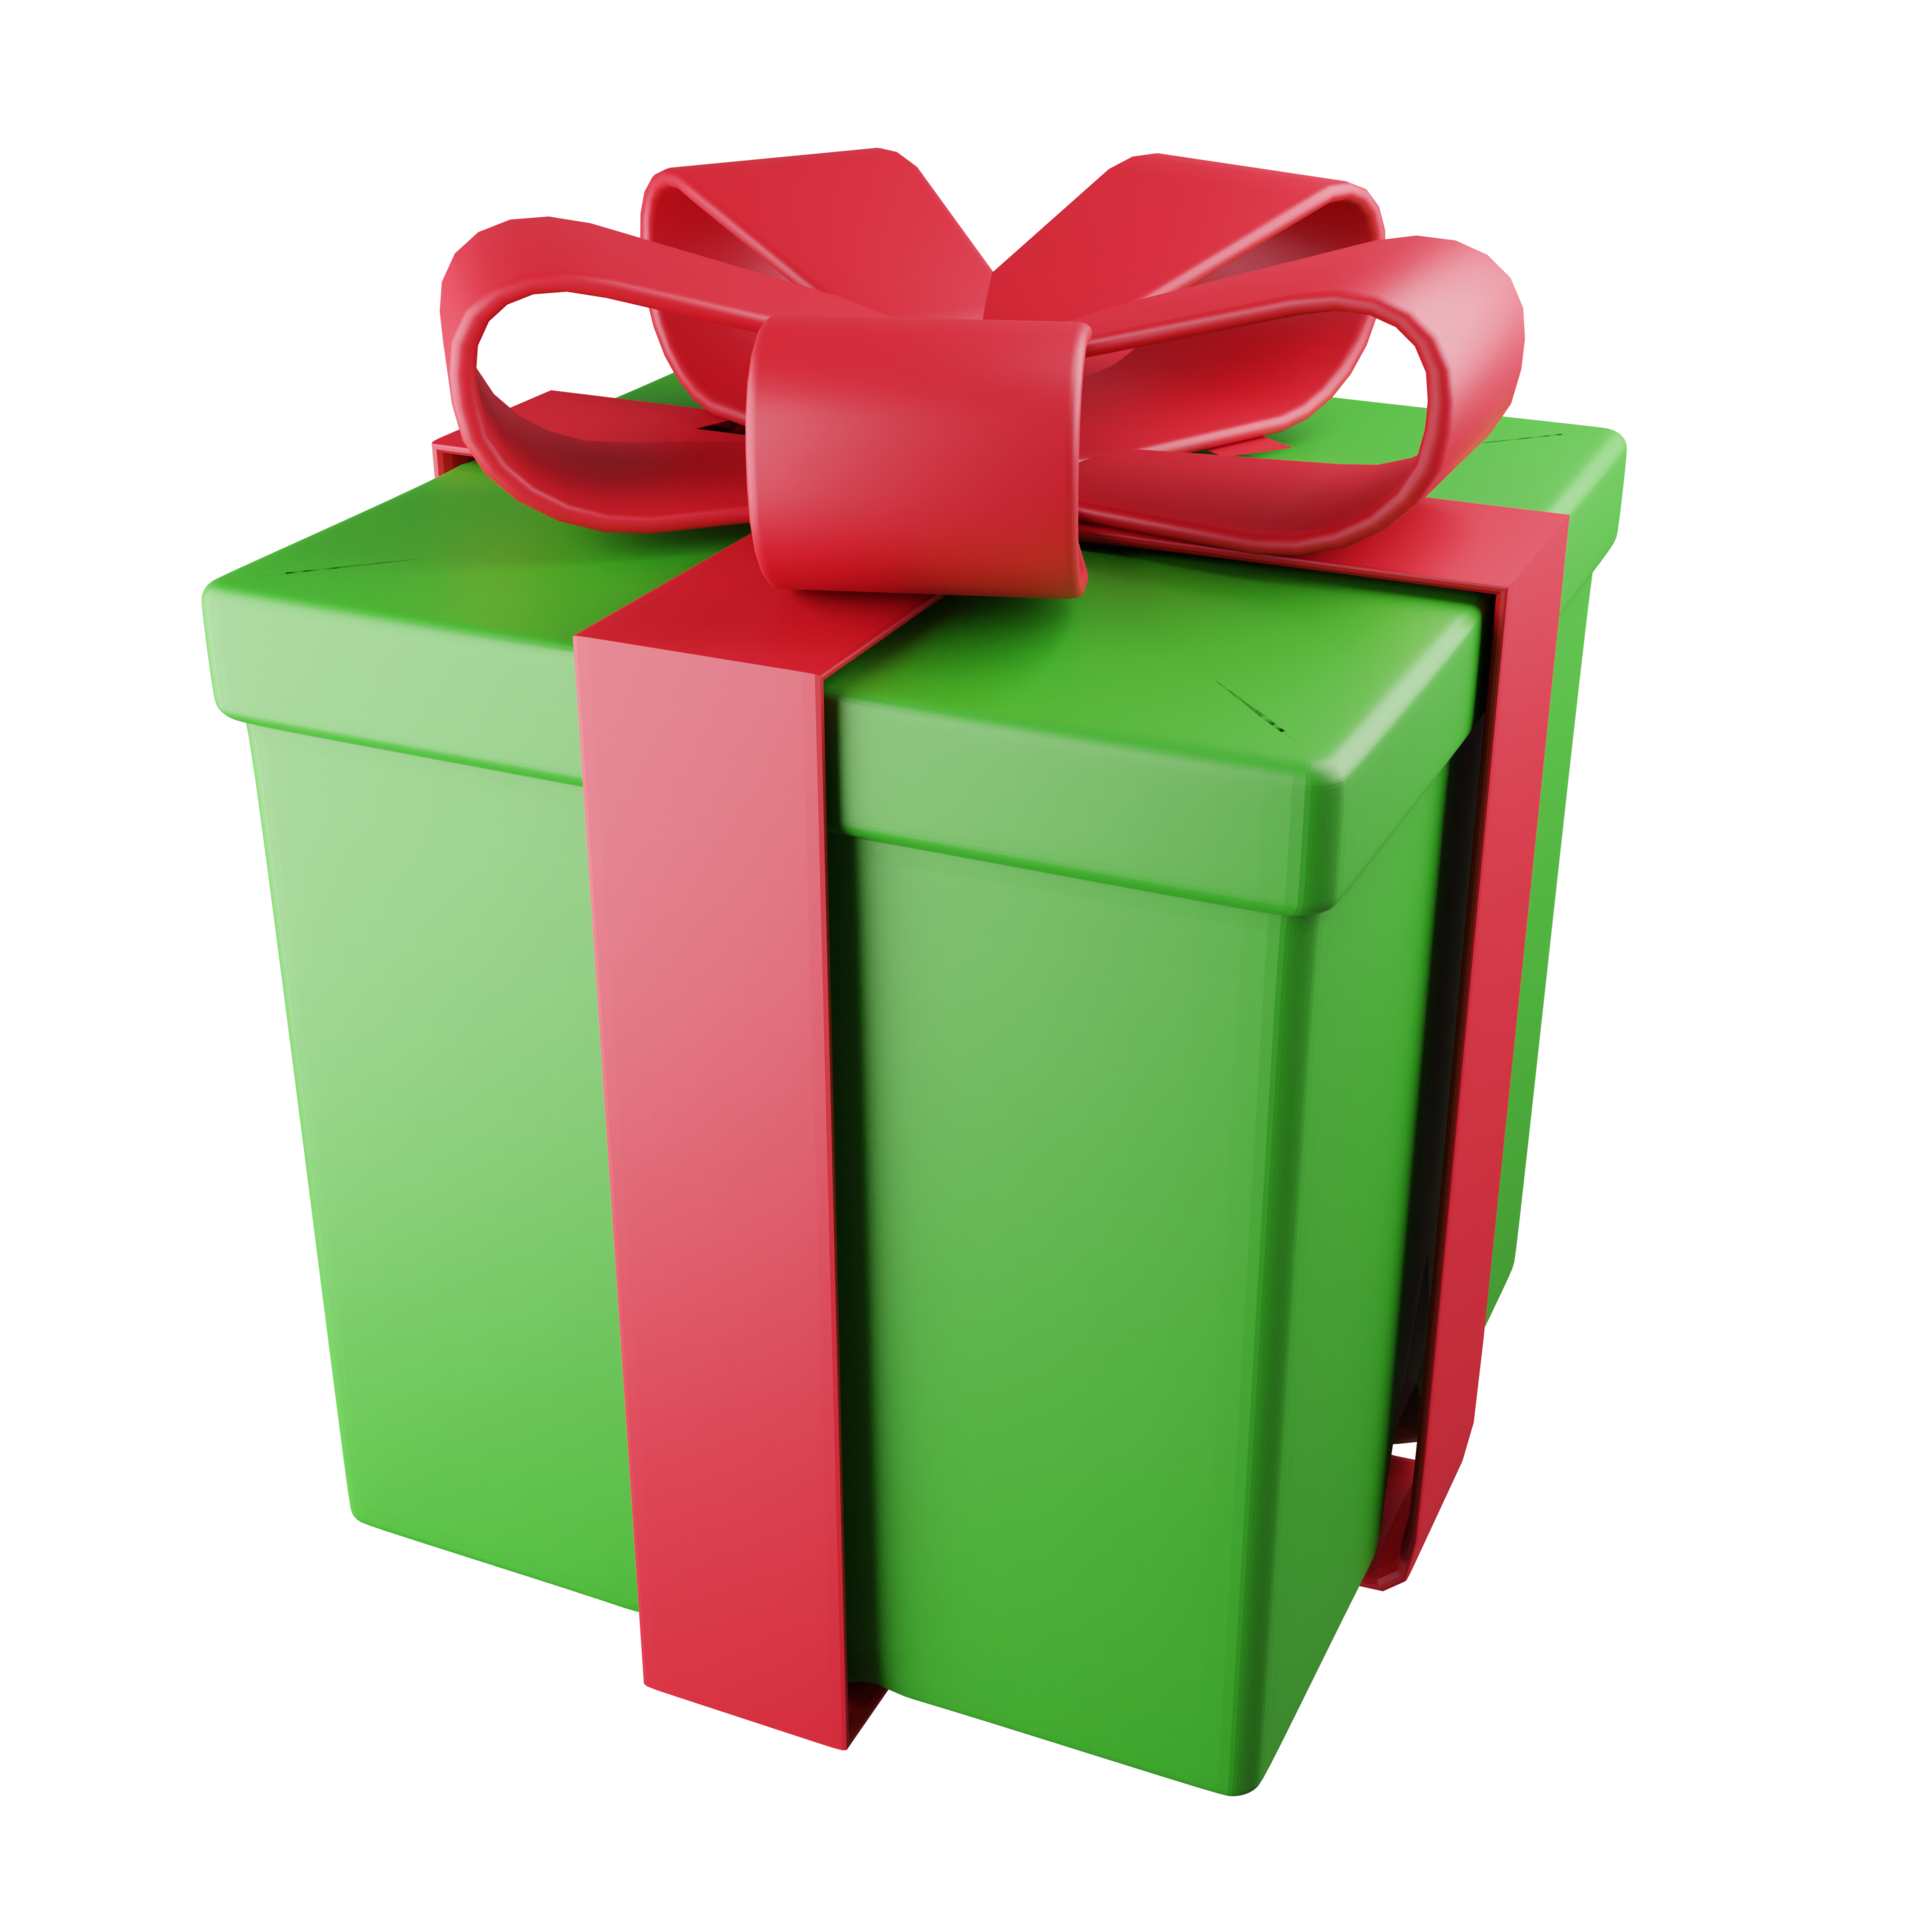 3d-rendering-close-box-present-isolated-on-transparent-background-png.png